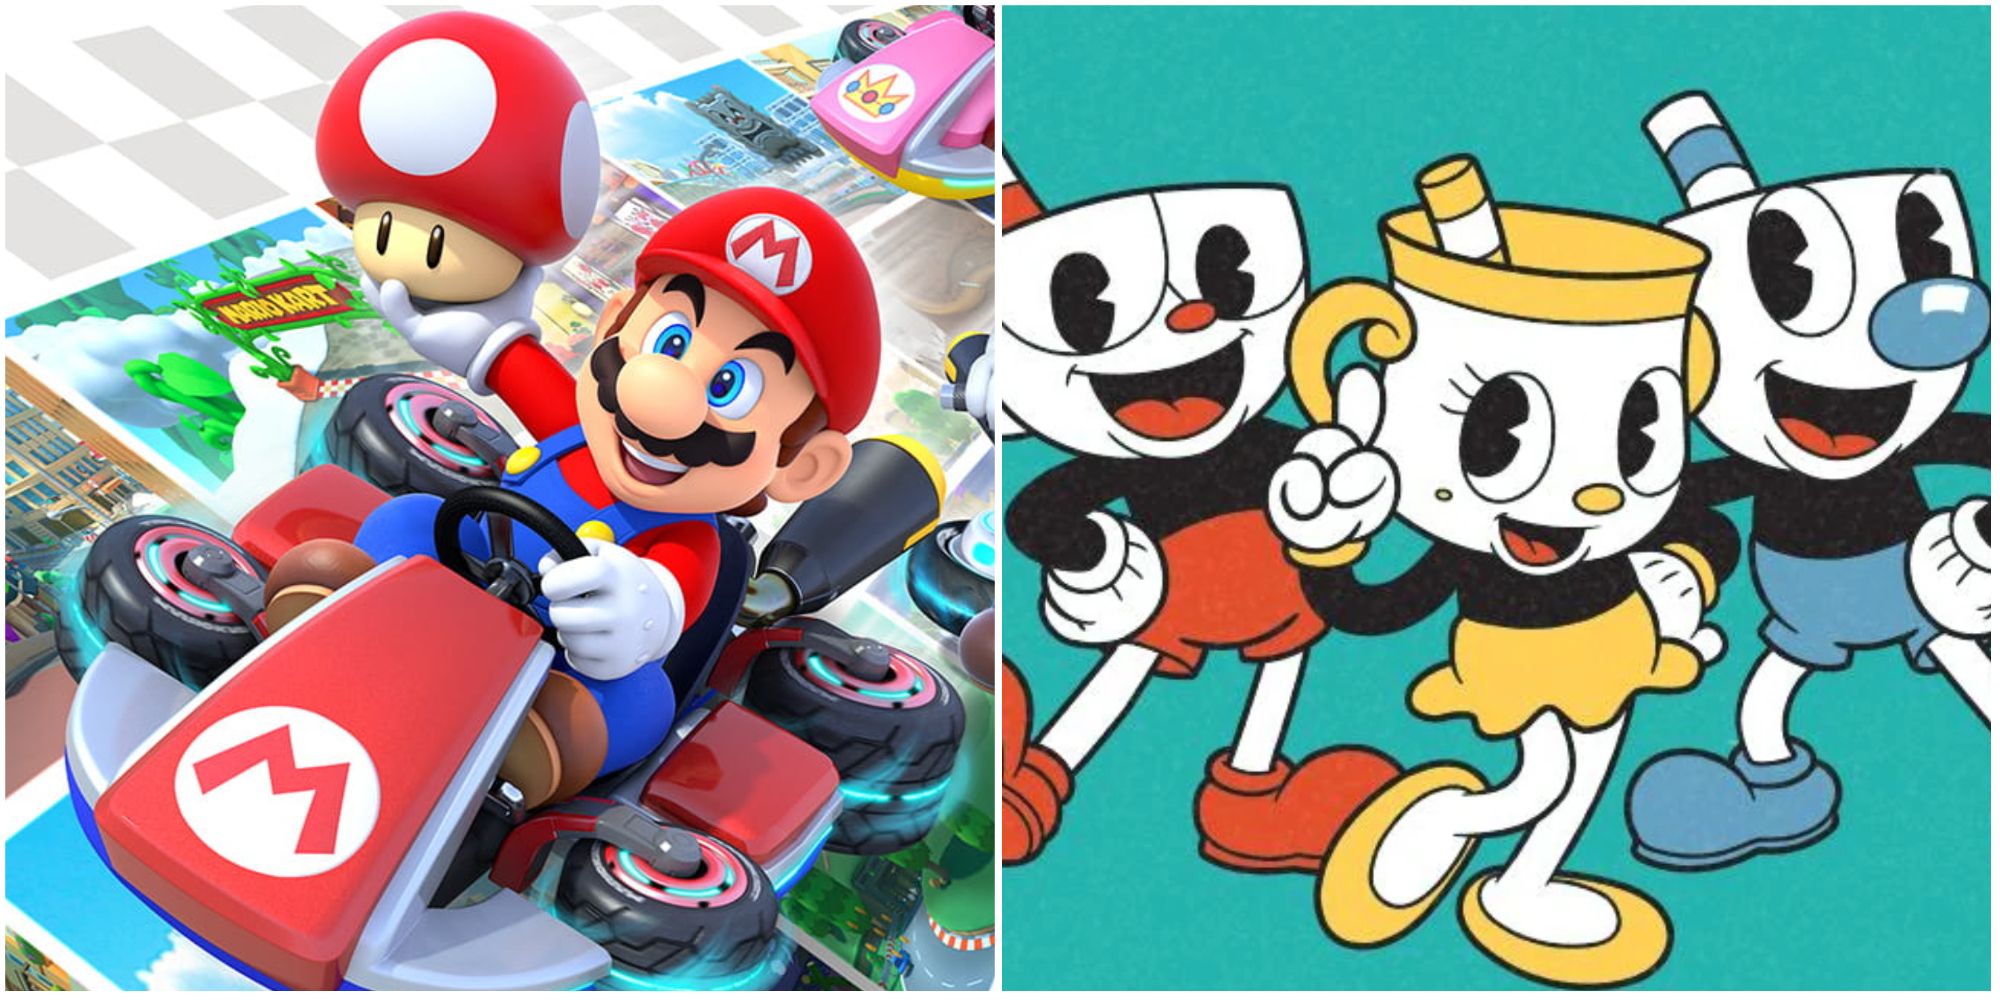 split image of mario kart 8 booster pass and cuphead: the delicious last course